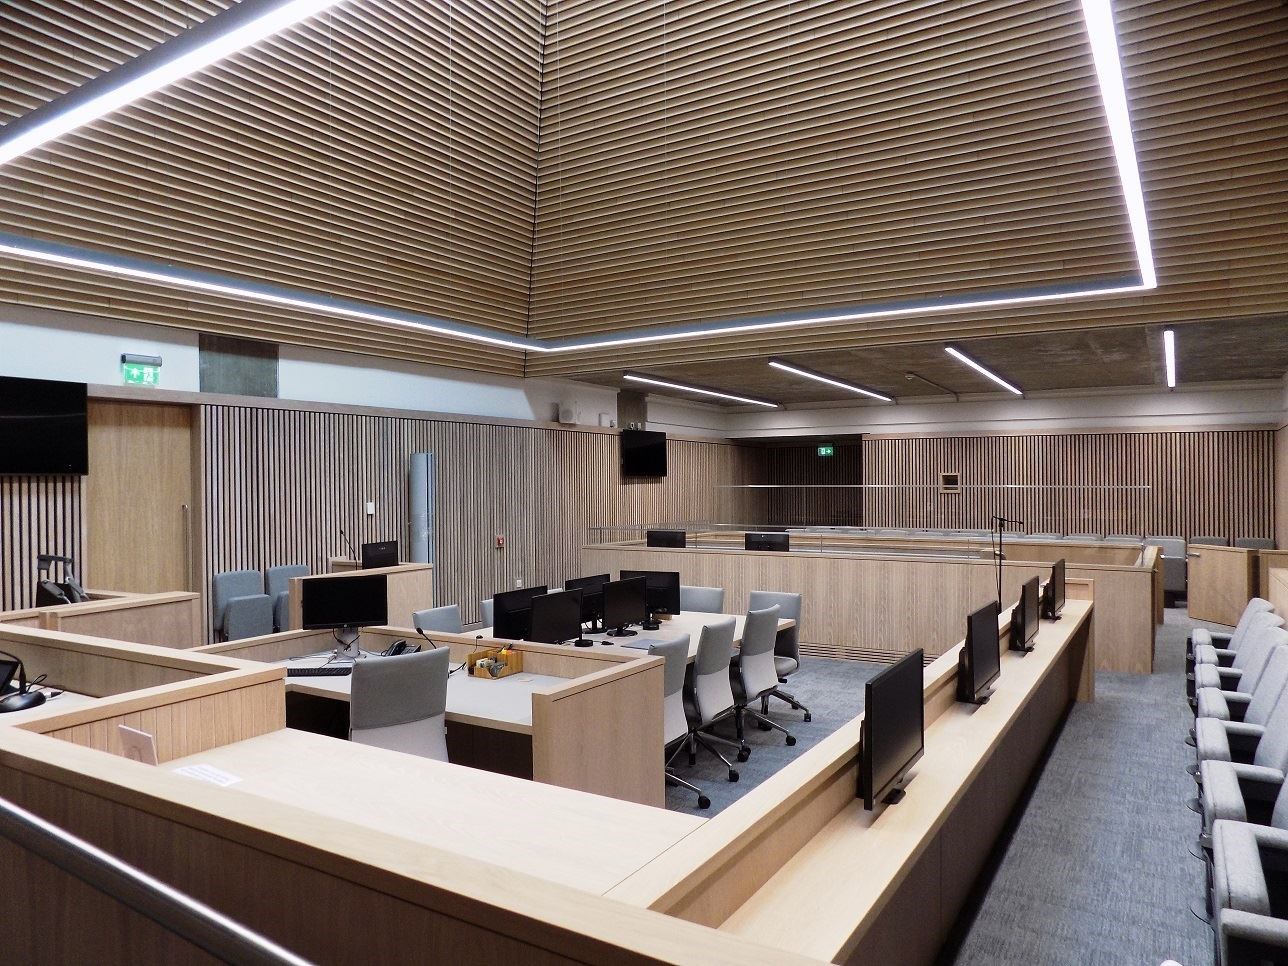 Inside one of the court rooms at the Inverness Justice Centre.